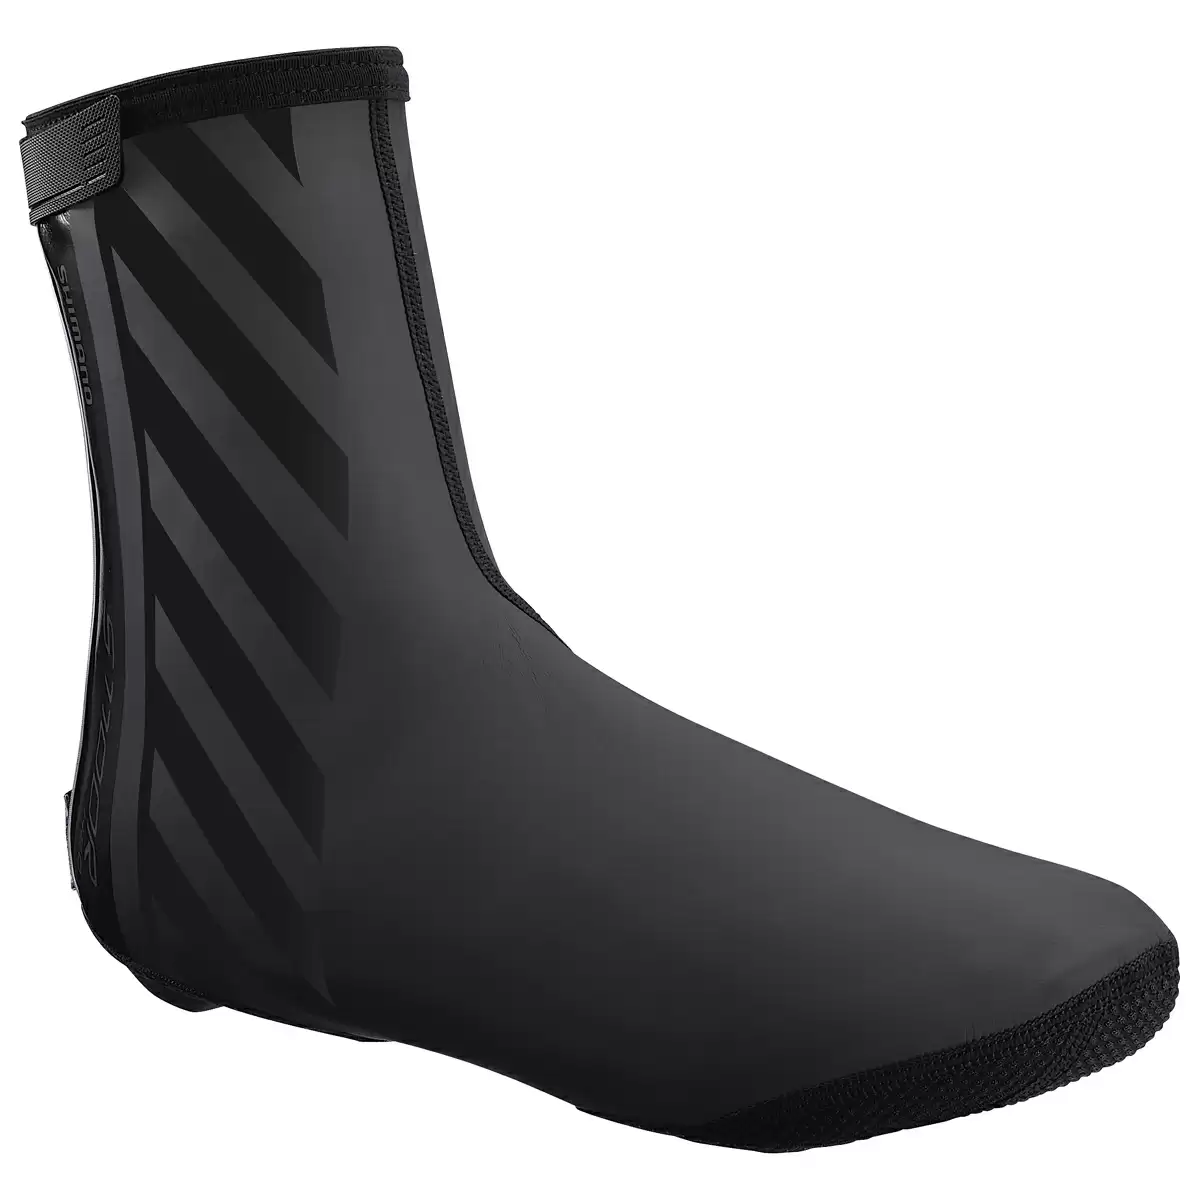 Shoe covers road S1100R H2O black size XL (44-47) - image